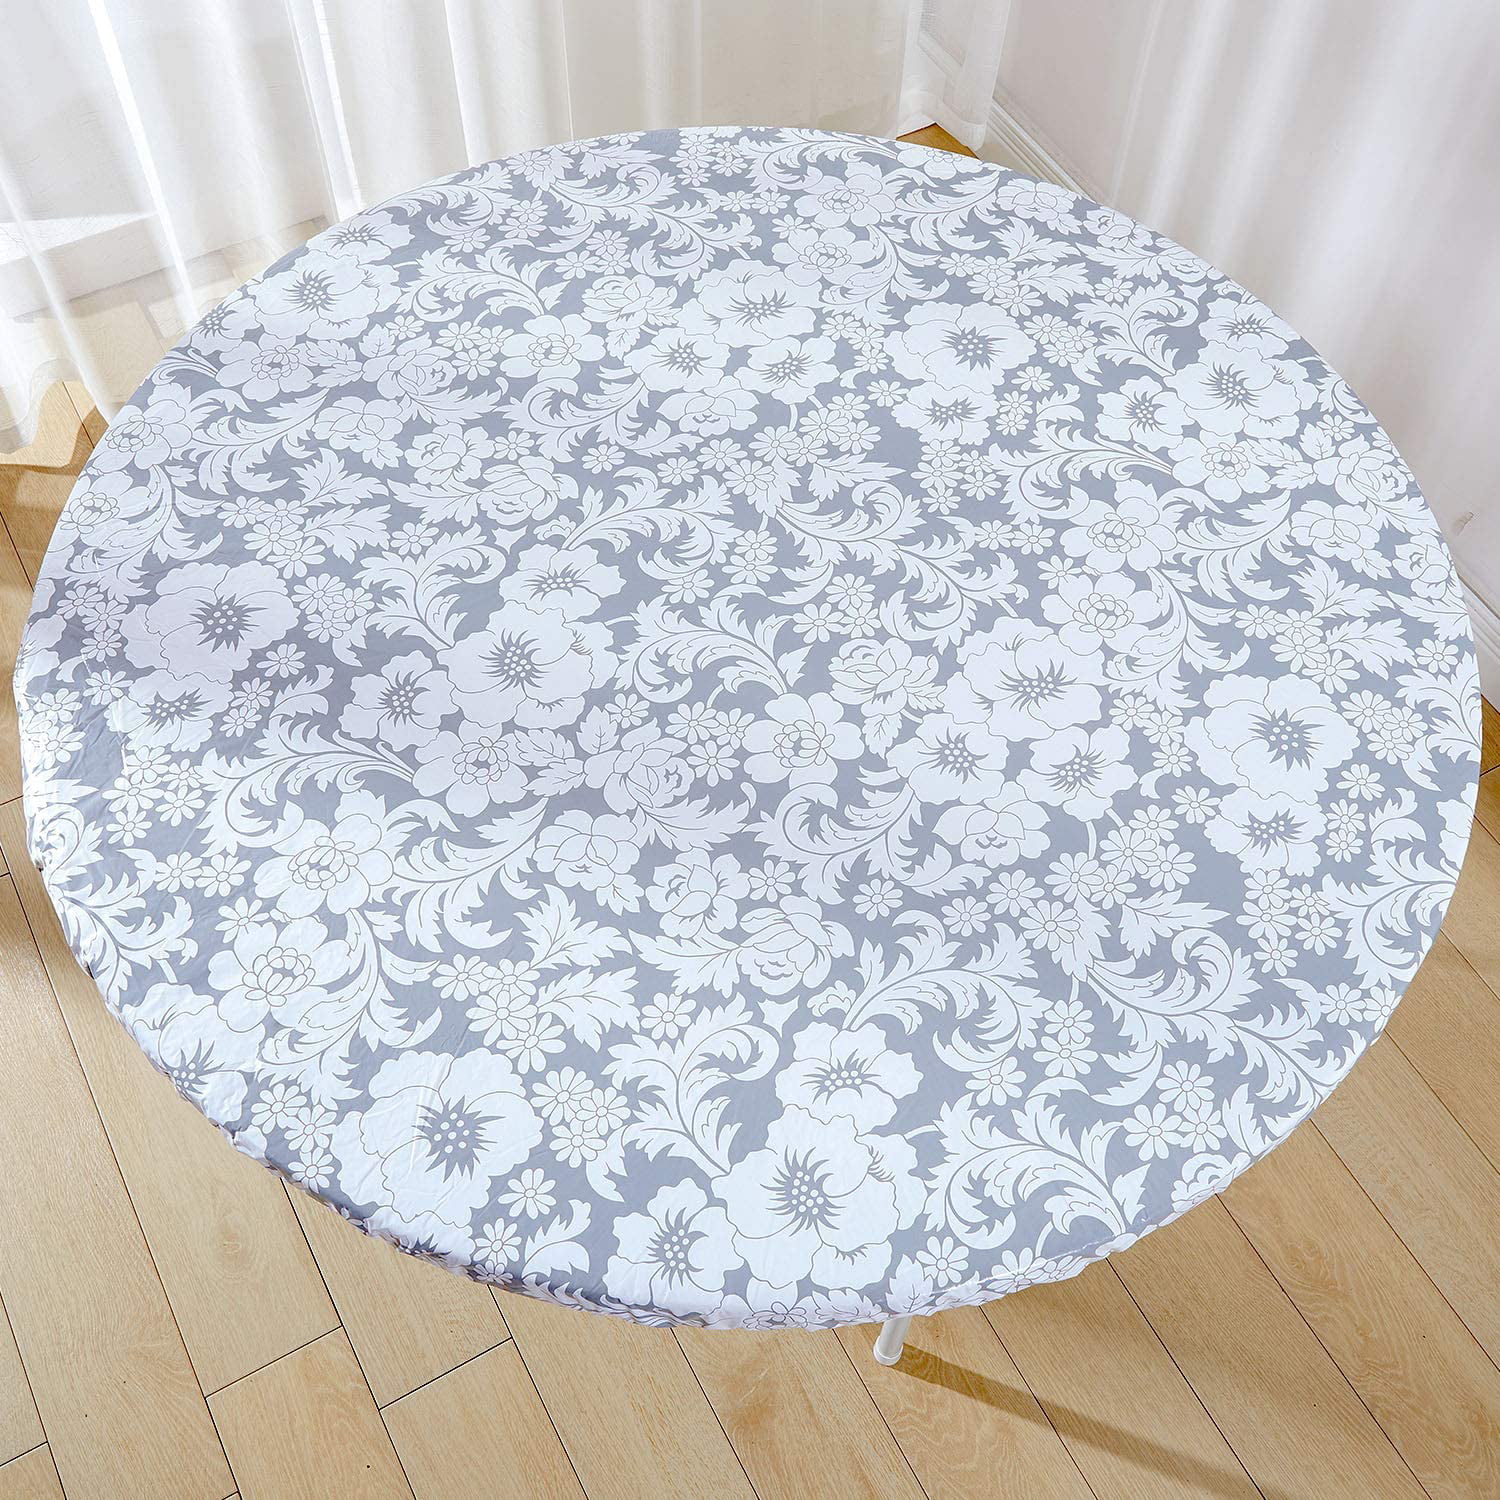 Vinyl Elastic Table Cover With Flannel, What Size Tablecloth Do I Need For A 44 Inch Round Table